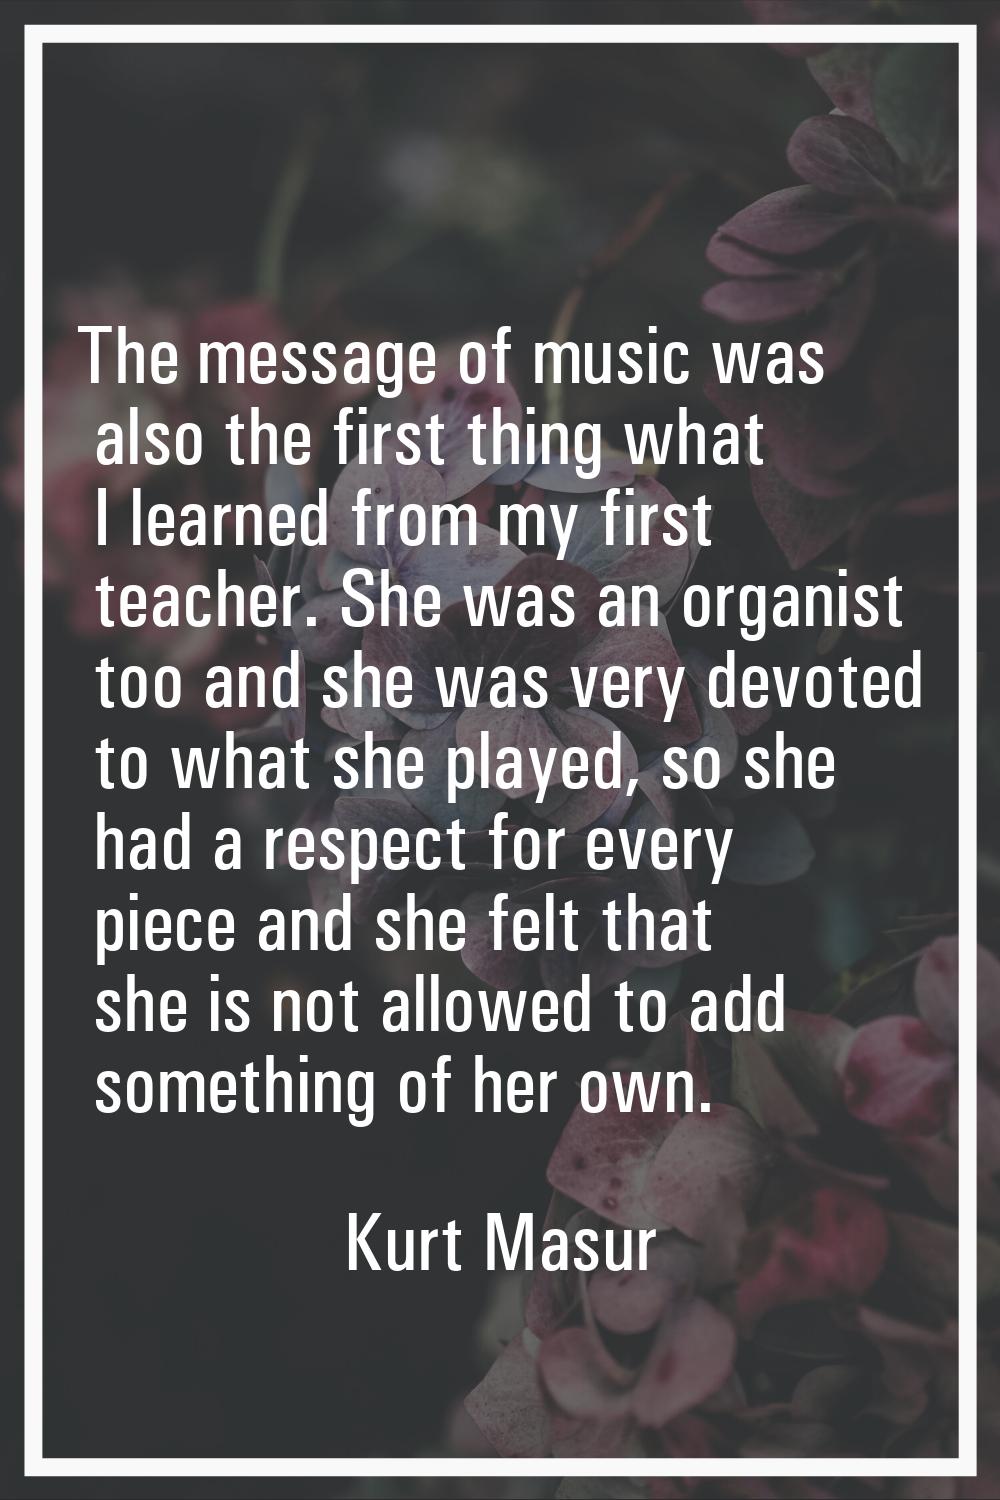 The message of music was also the first thing what I learned from my first teacher. She was an orga